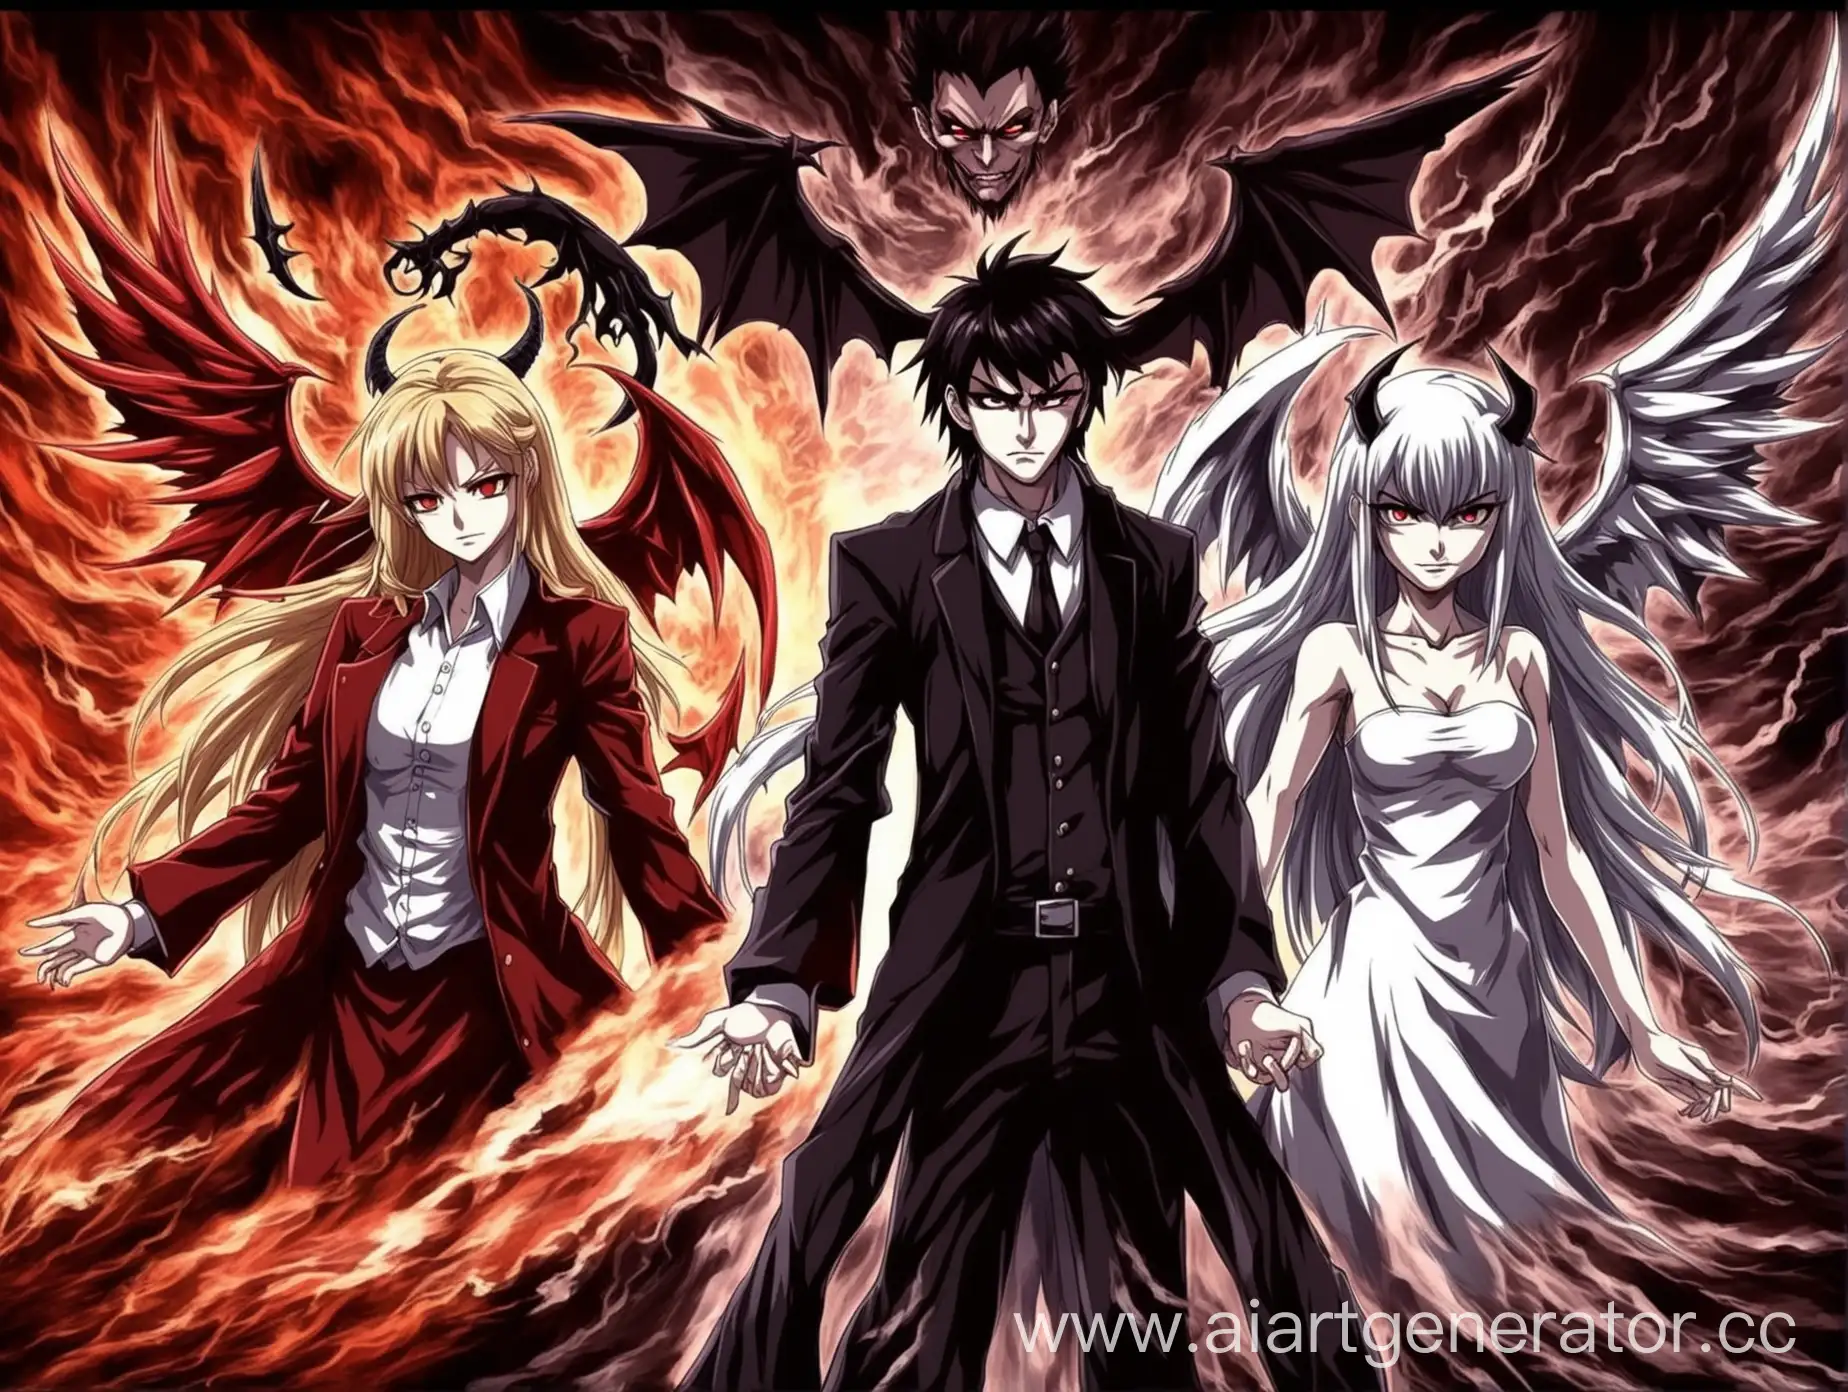 Anime-Style-Art-of-Good-and-Evil-Conflict-for-Website-Banner